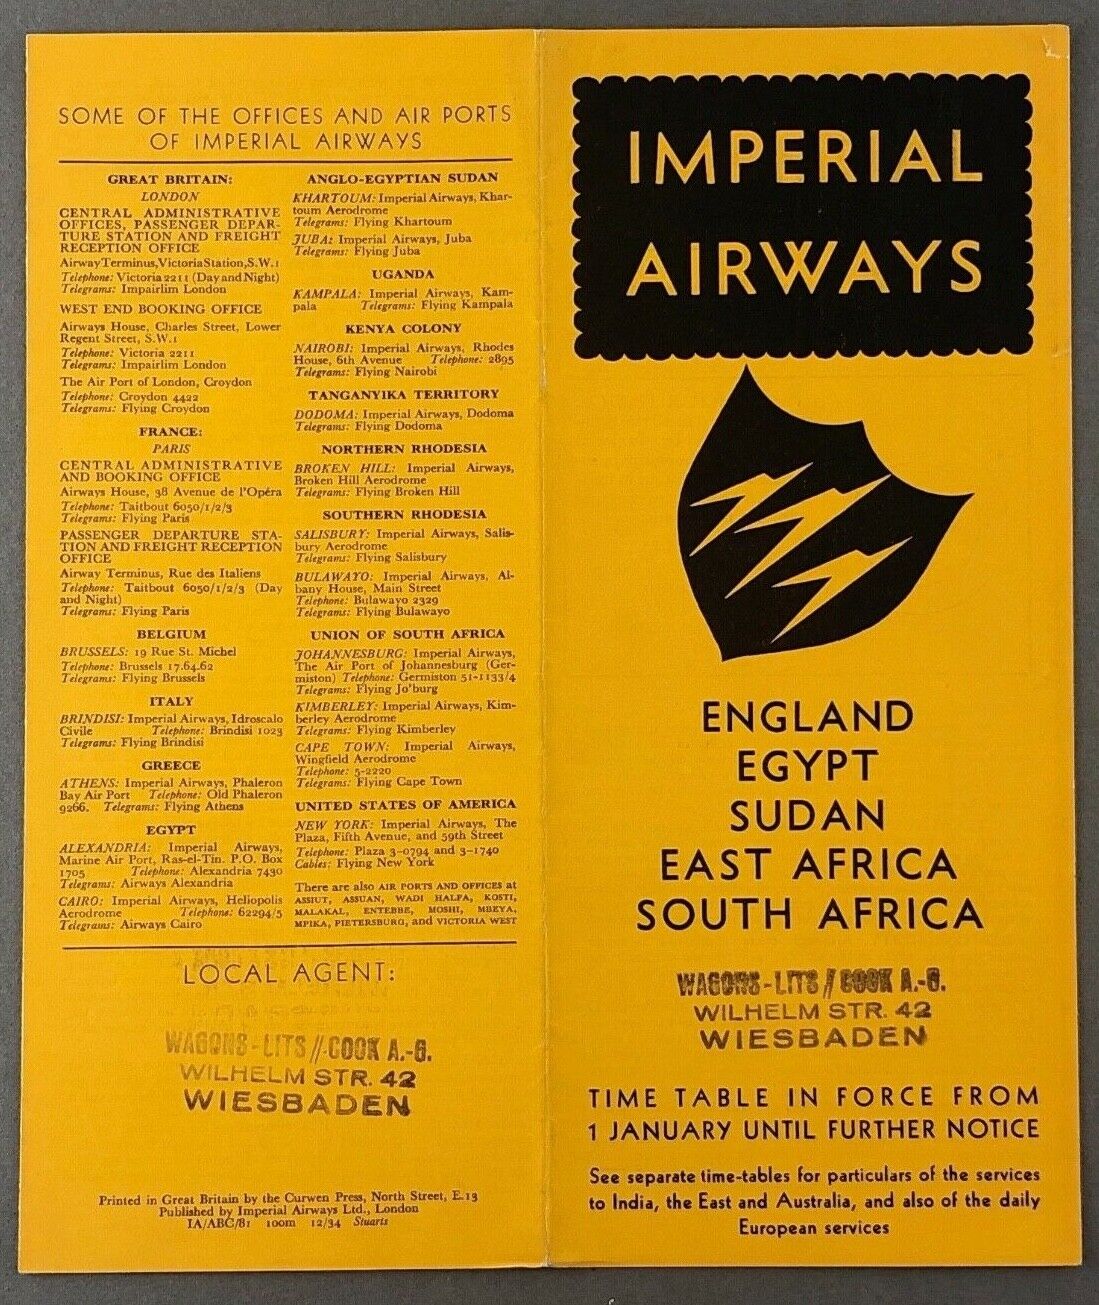 IMPERIAL AIRWAYS JANUARY 1935 AIRLINE TIMETABLE EGYPT SUDAN EAST SOUTH AFRICA 